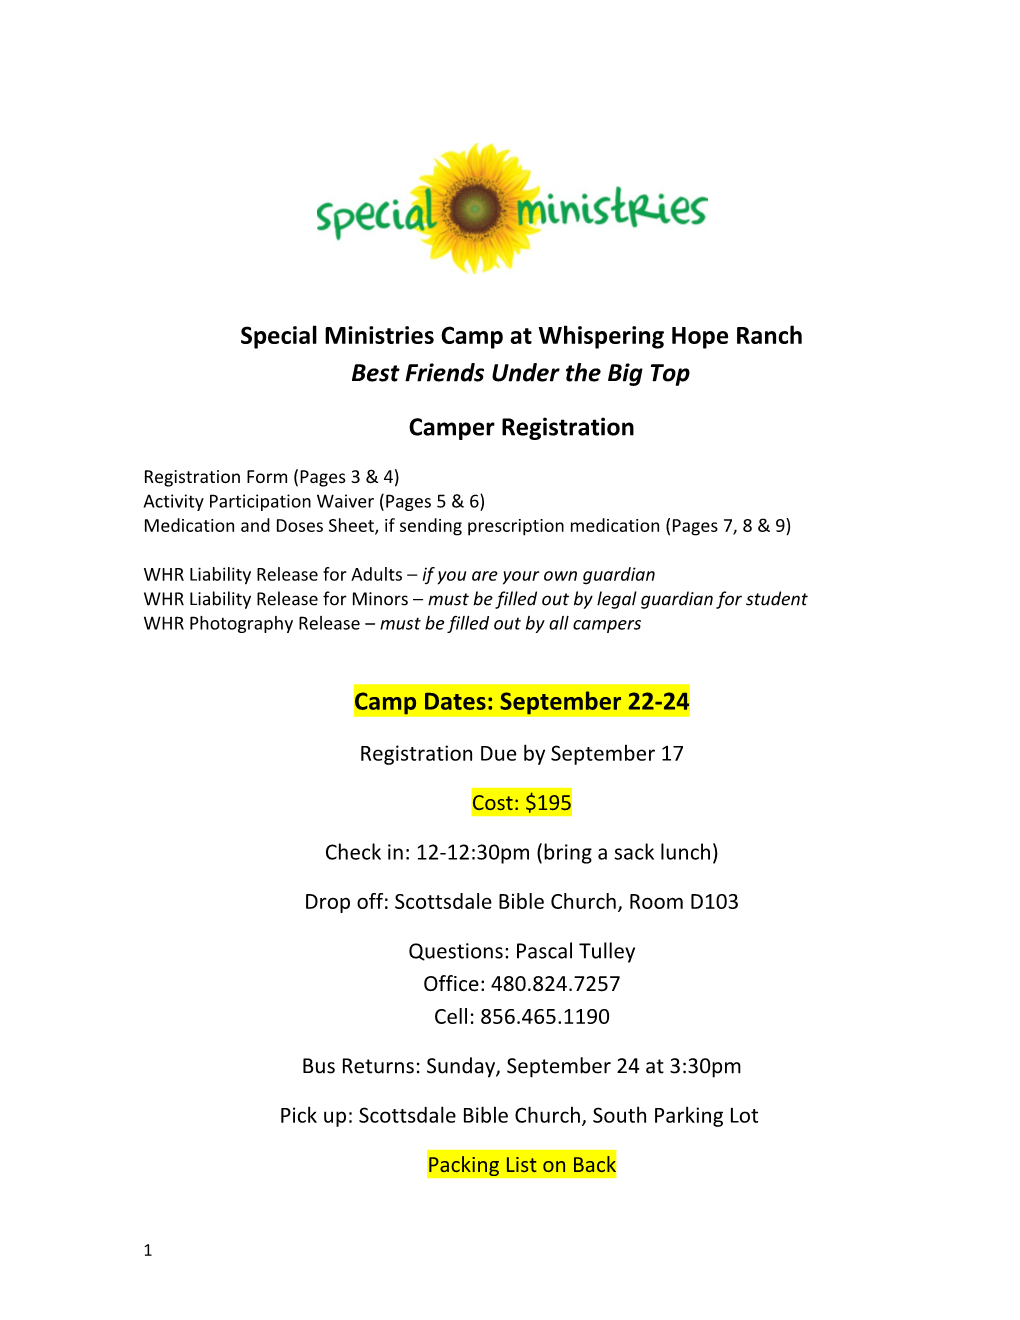 Special Ministries Camp at Whispering Hope Ranch